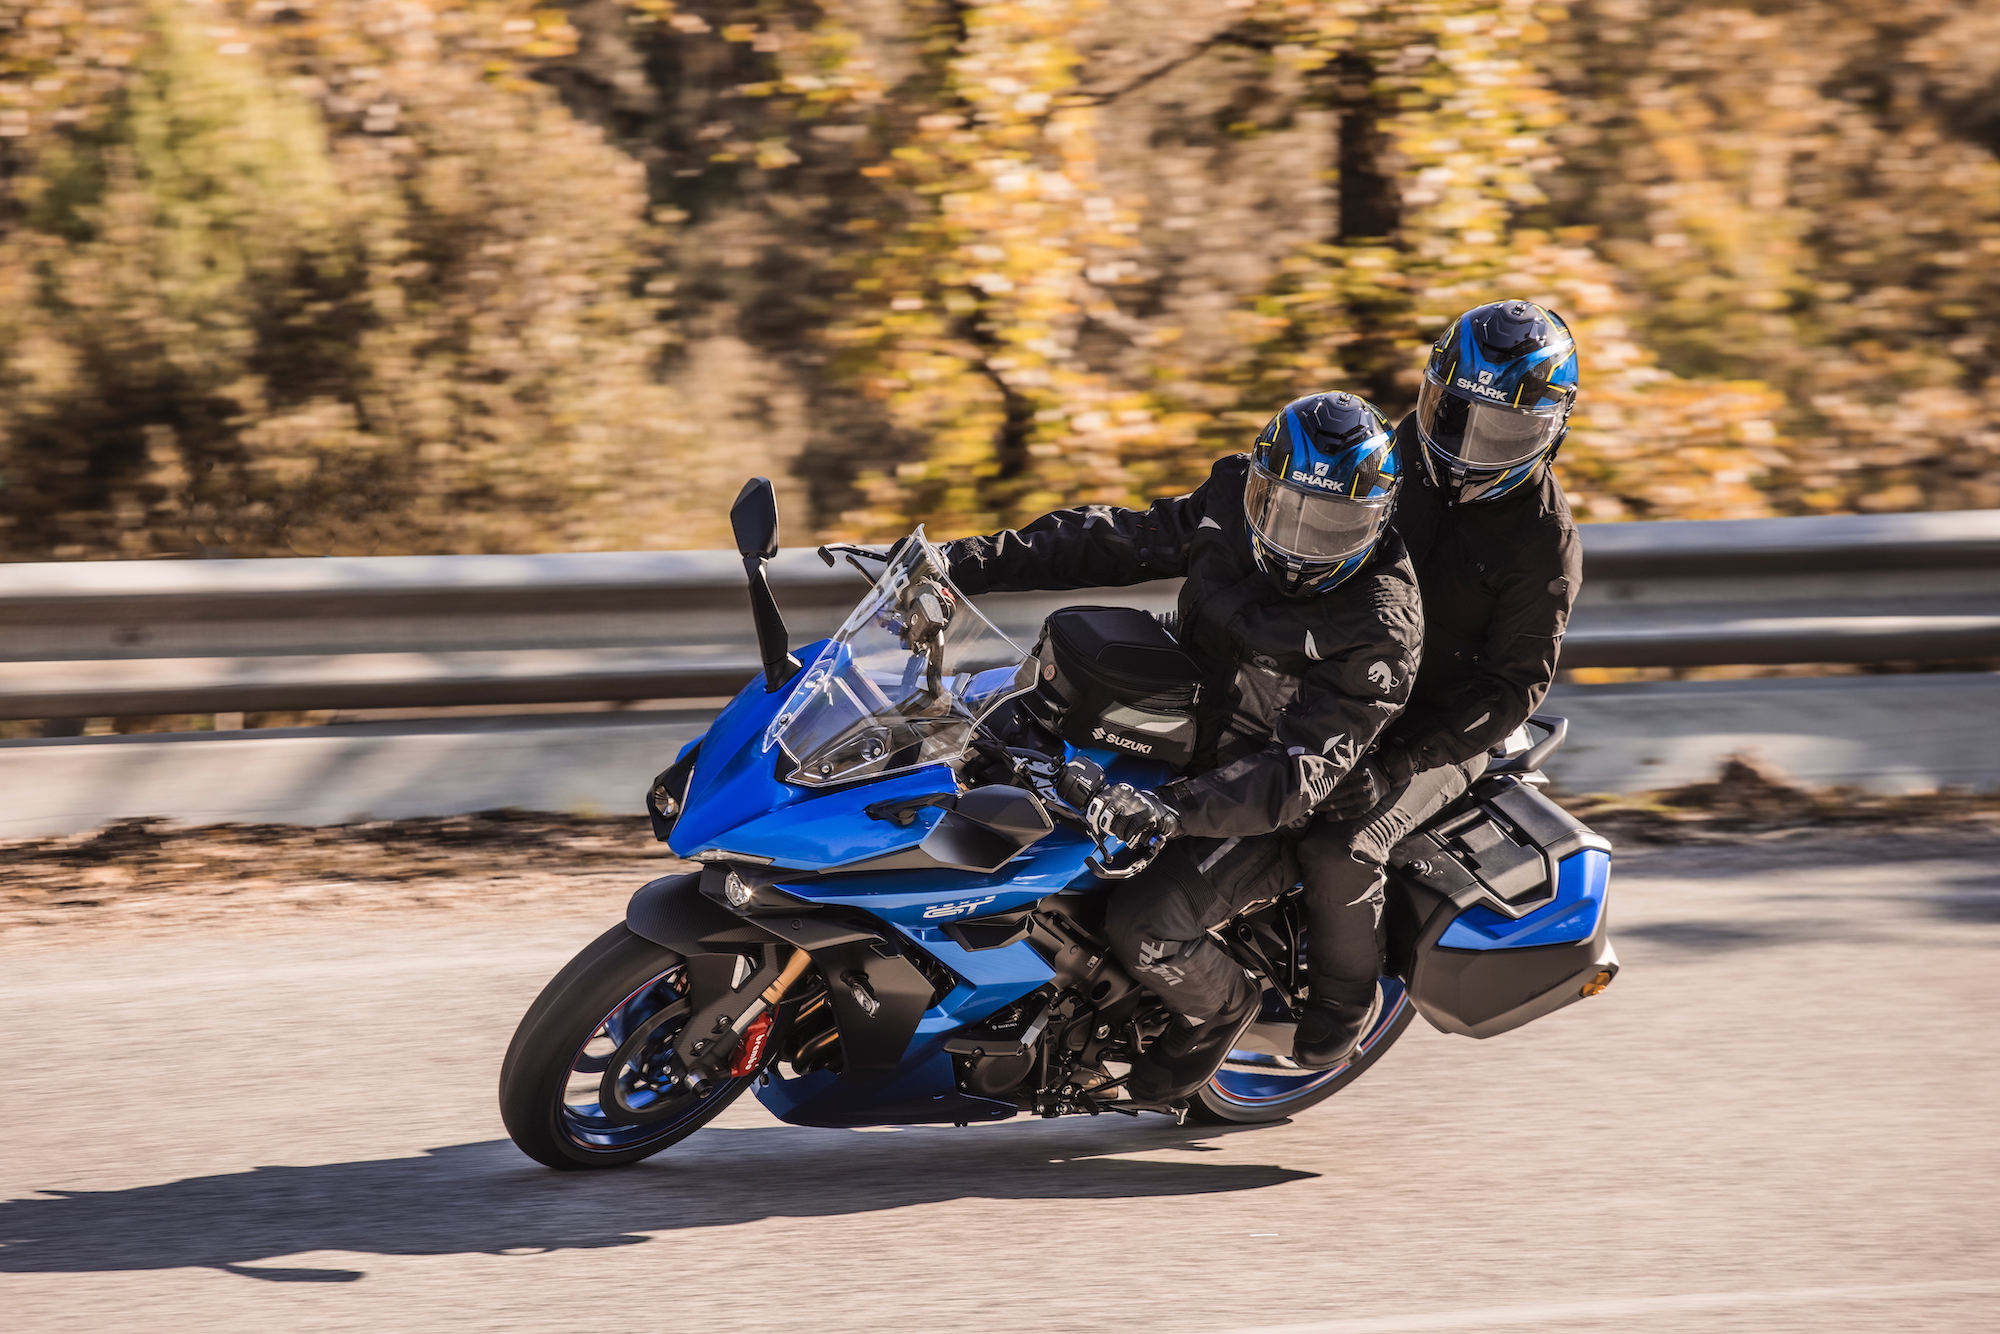 New Rider Guide | How To Ride With A Pillion Passenger | Visordown